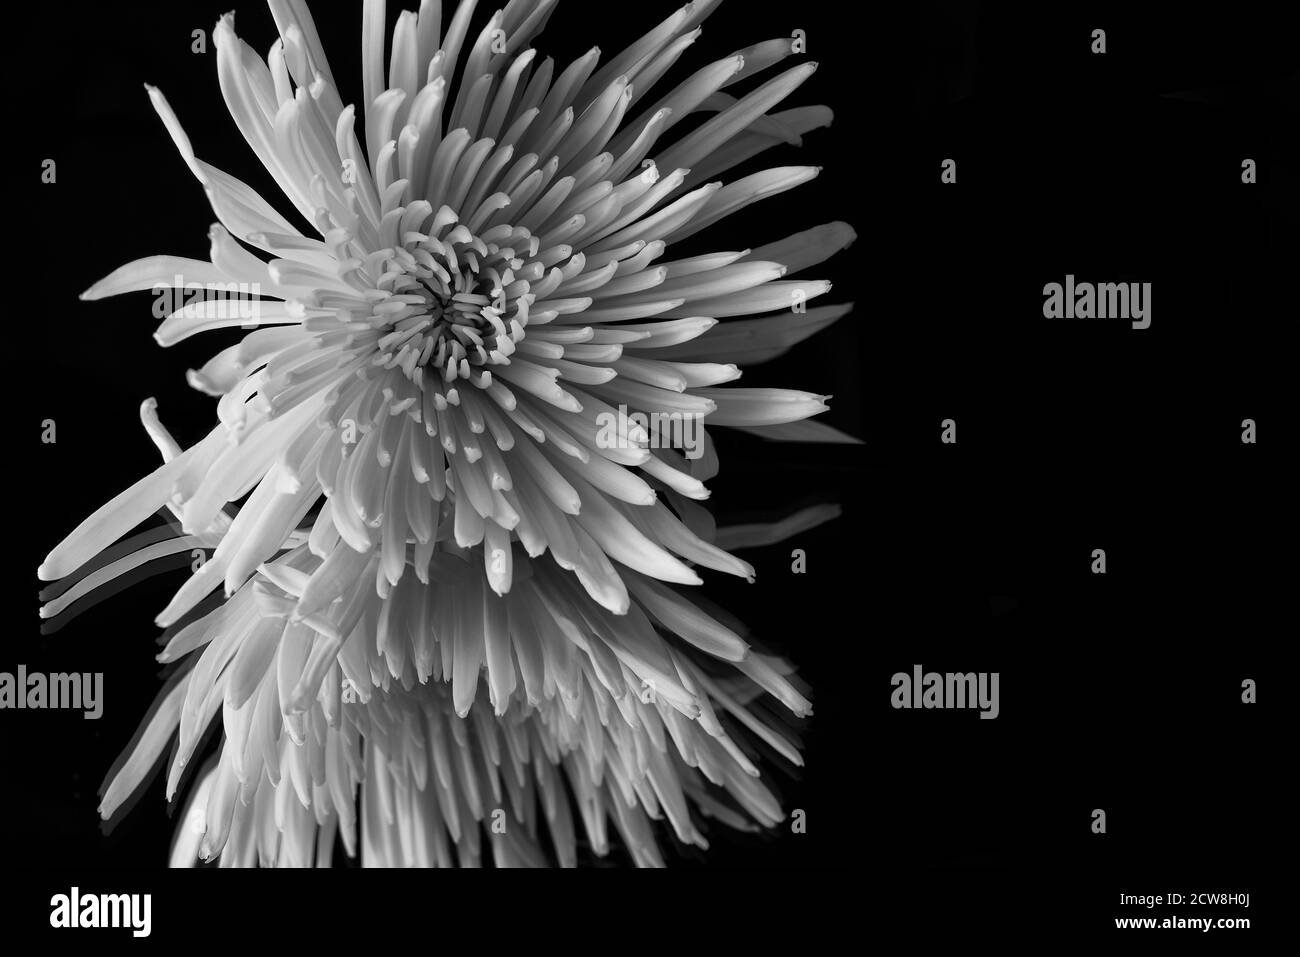 Large blooming chrysanthemum with reflection in black and white Stock Photo